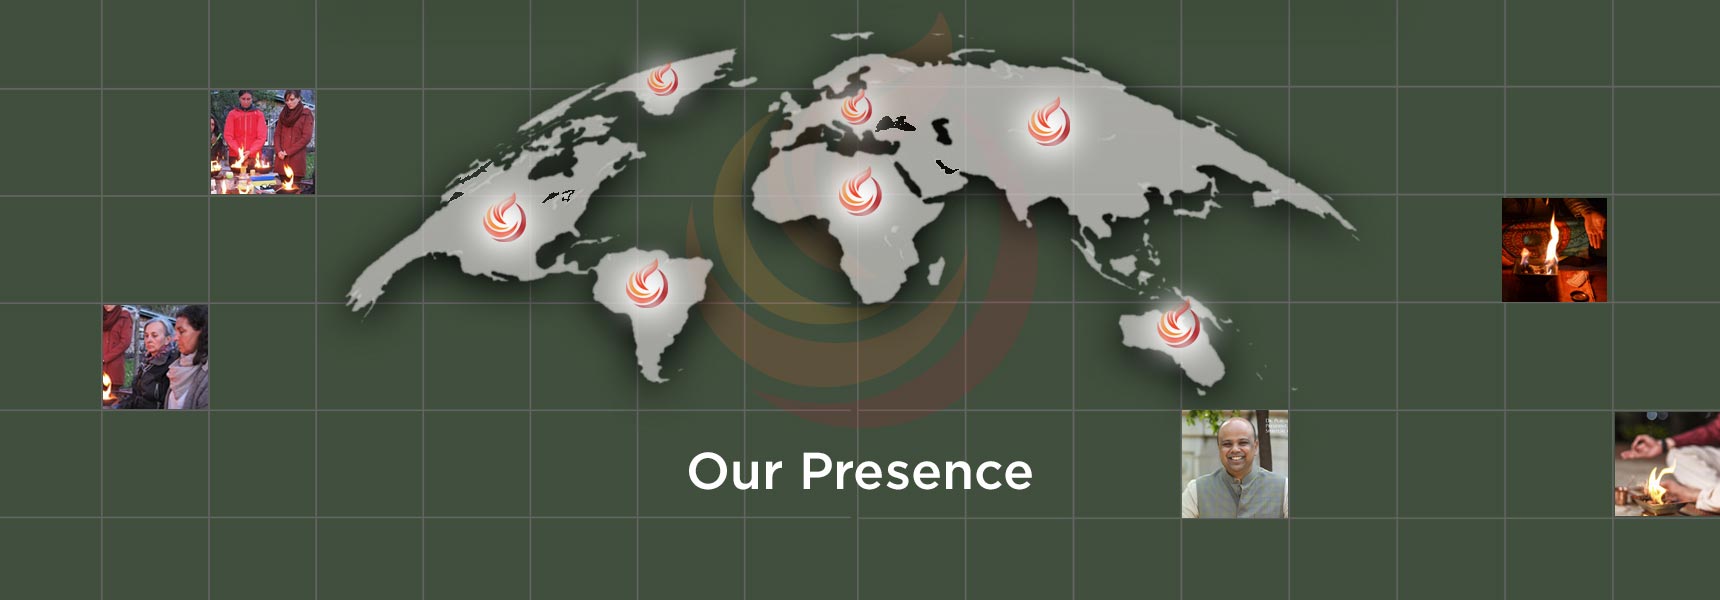 Our Presence